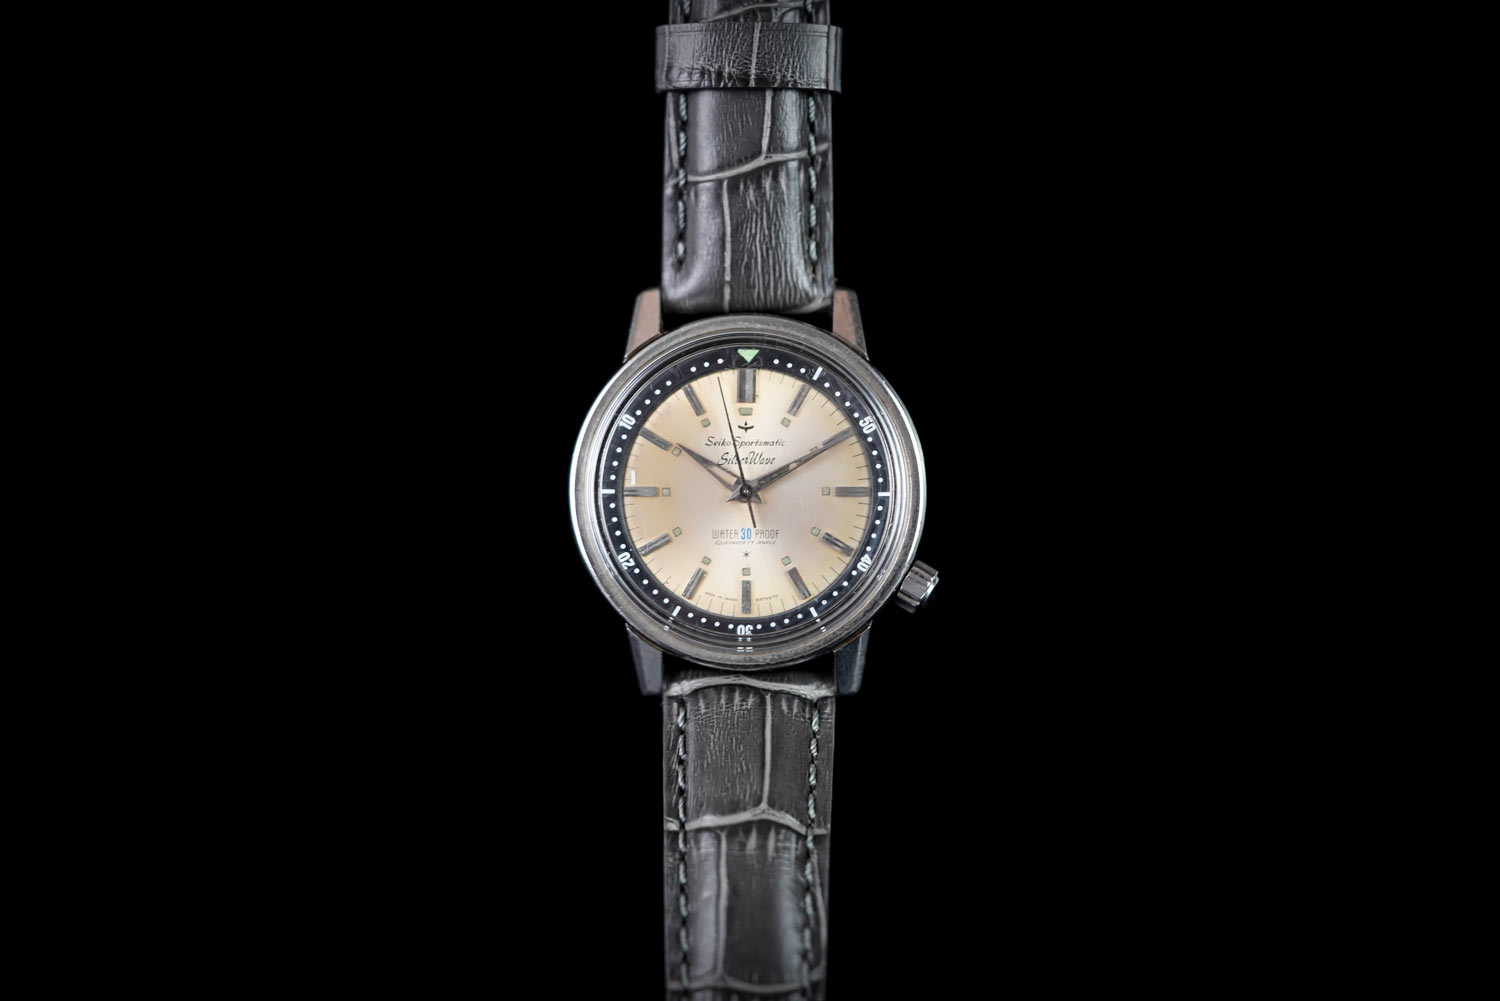 GENTLEMEN'S SEIKO SPORTSMATIC SILVERWAVE WRISTWATCH, circular patina dial with silver hour markers